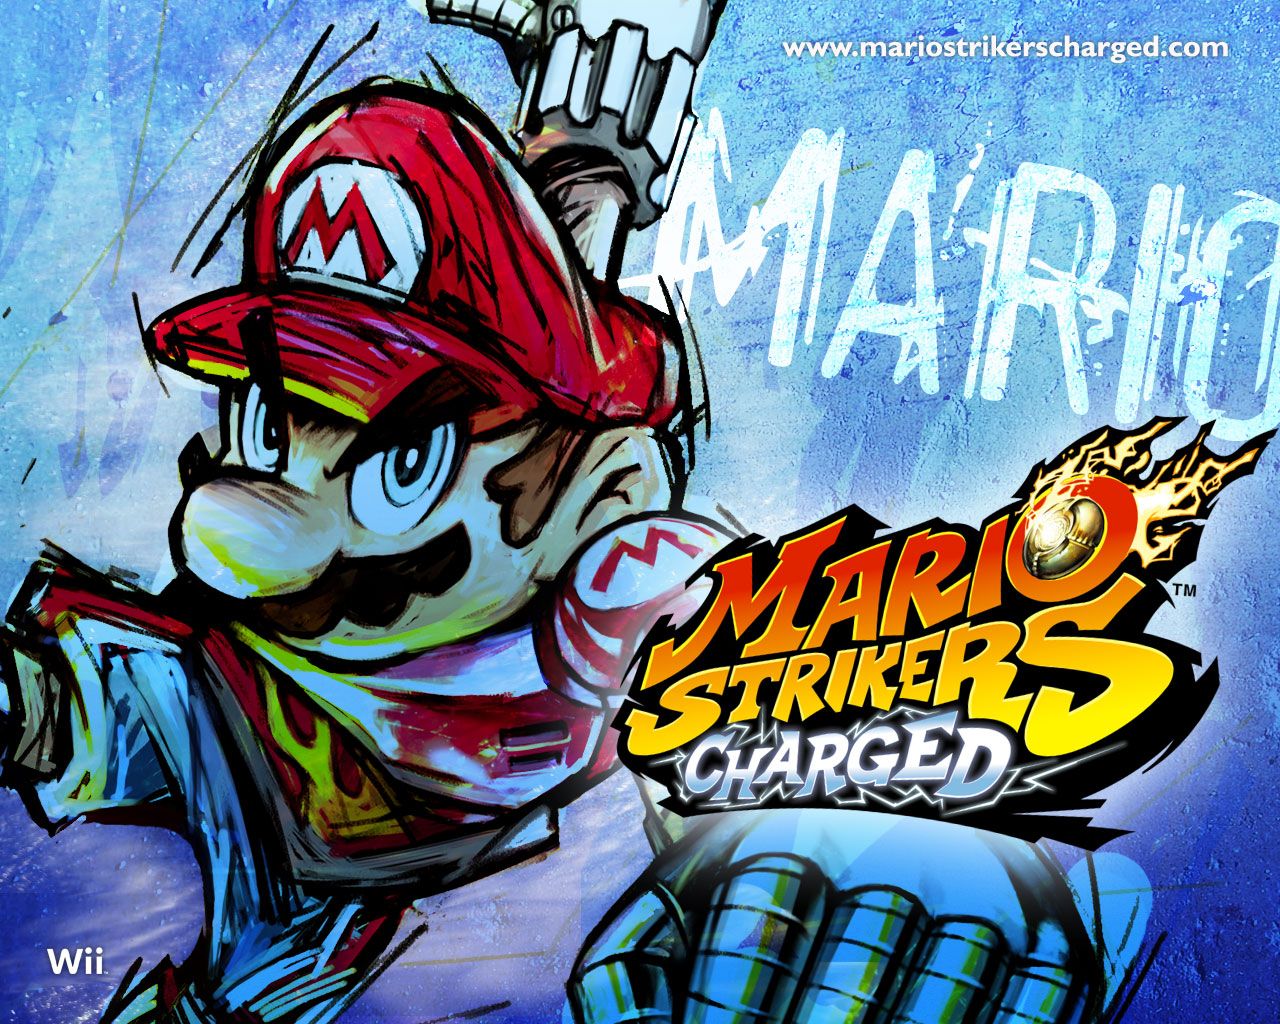 Mario Strikers Charged wallpaper, Video Game, HQ Mario Strikers